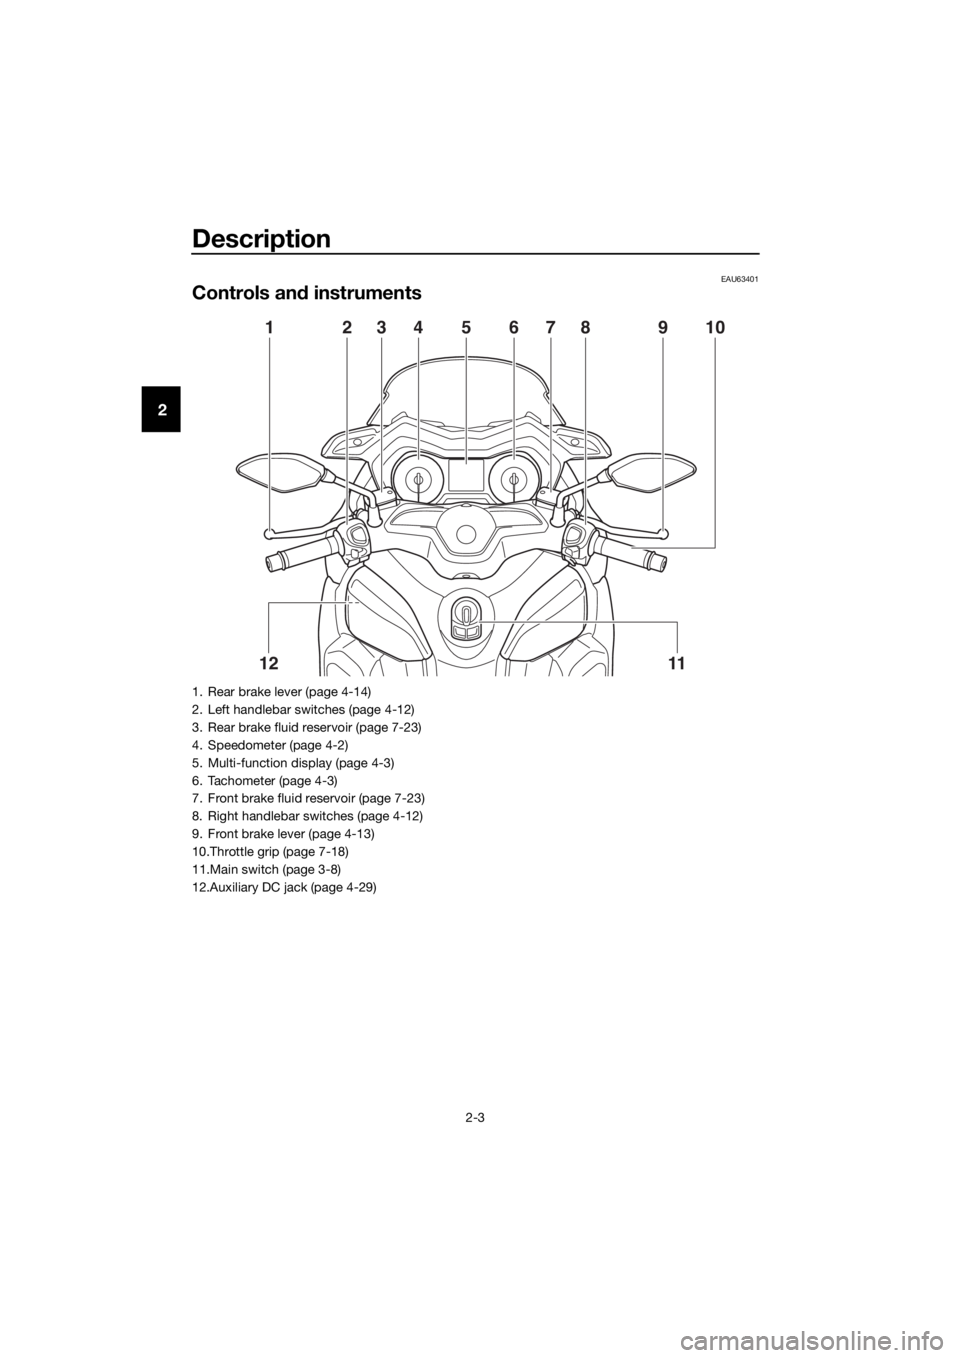 YAMAHA XMAX 300 2018  Owners Manual Description
2-3
2
EAU63401
Controls and instruments
10
1112
123987564
1. Rear brake lever (page 4-14)
2. Left handlebar switches (page 4-12)
3. Rear brake fluid reservoir (page 7-23)
4. Speedometer (p